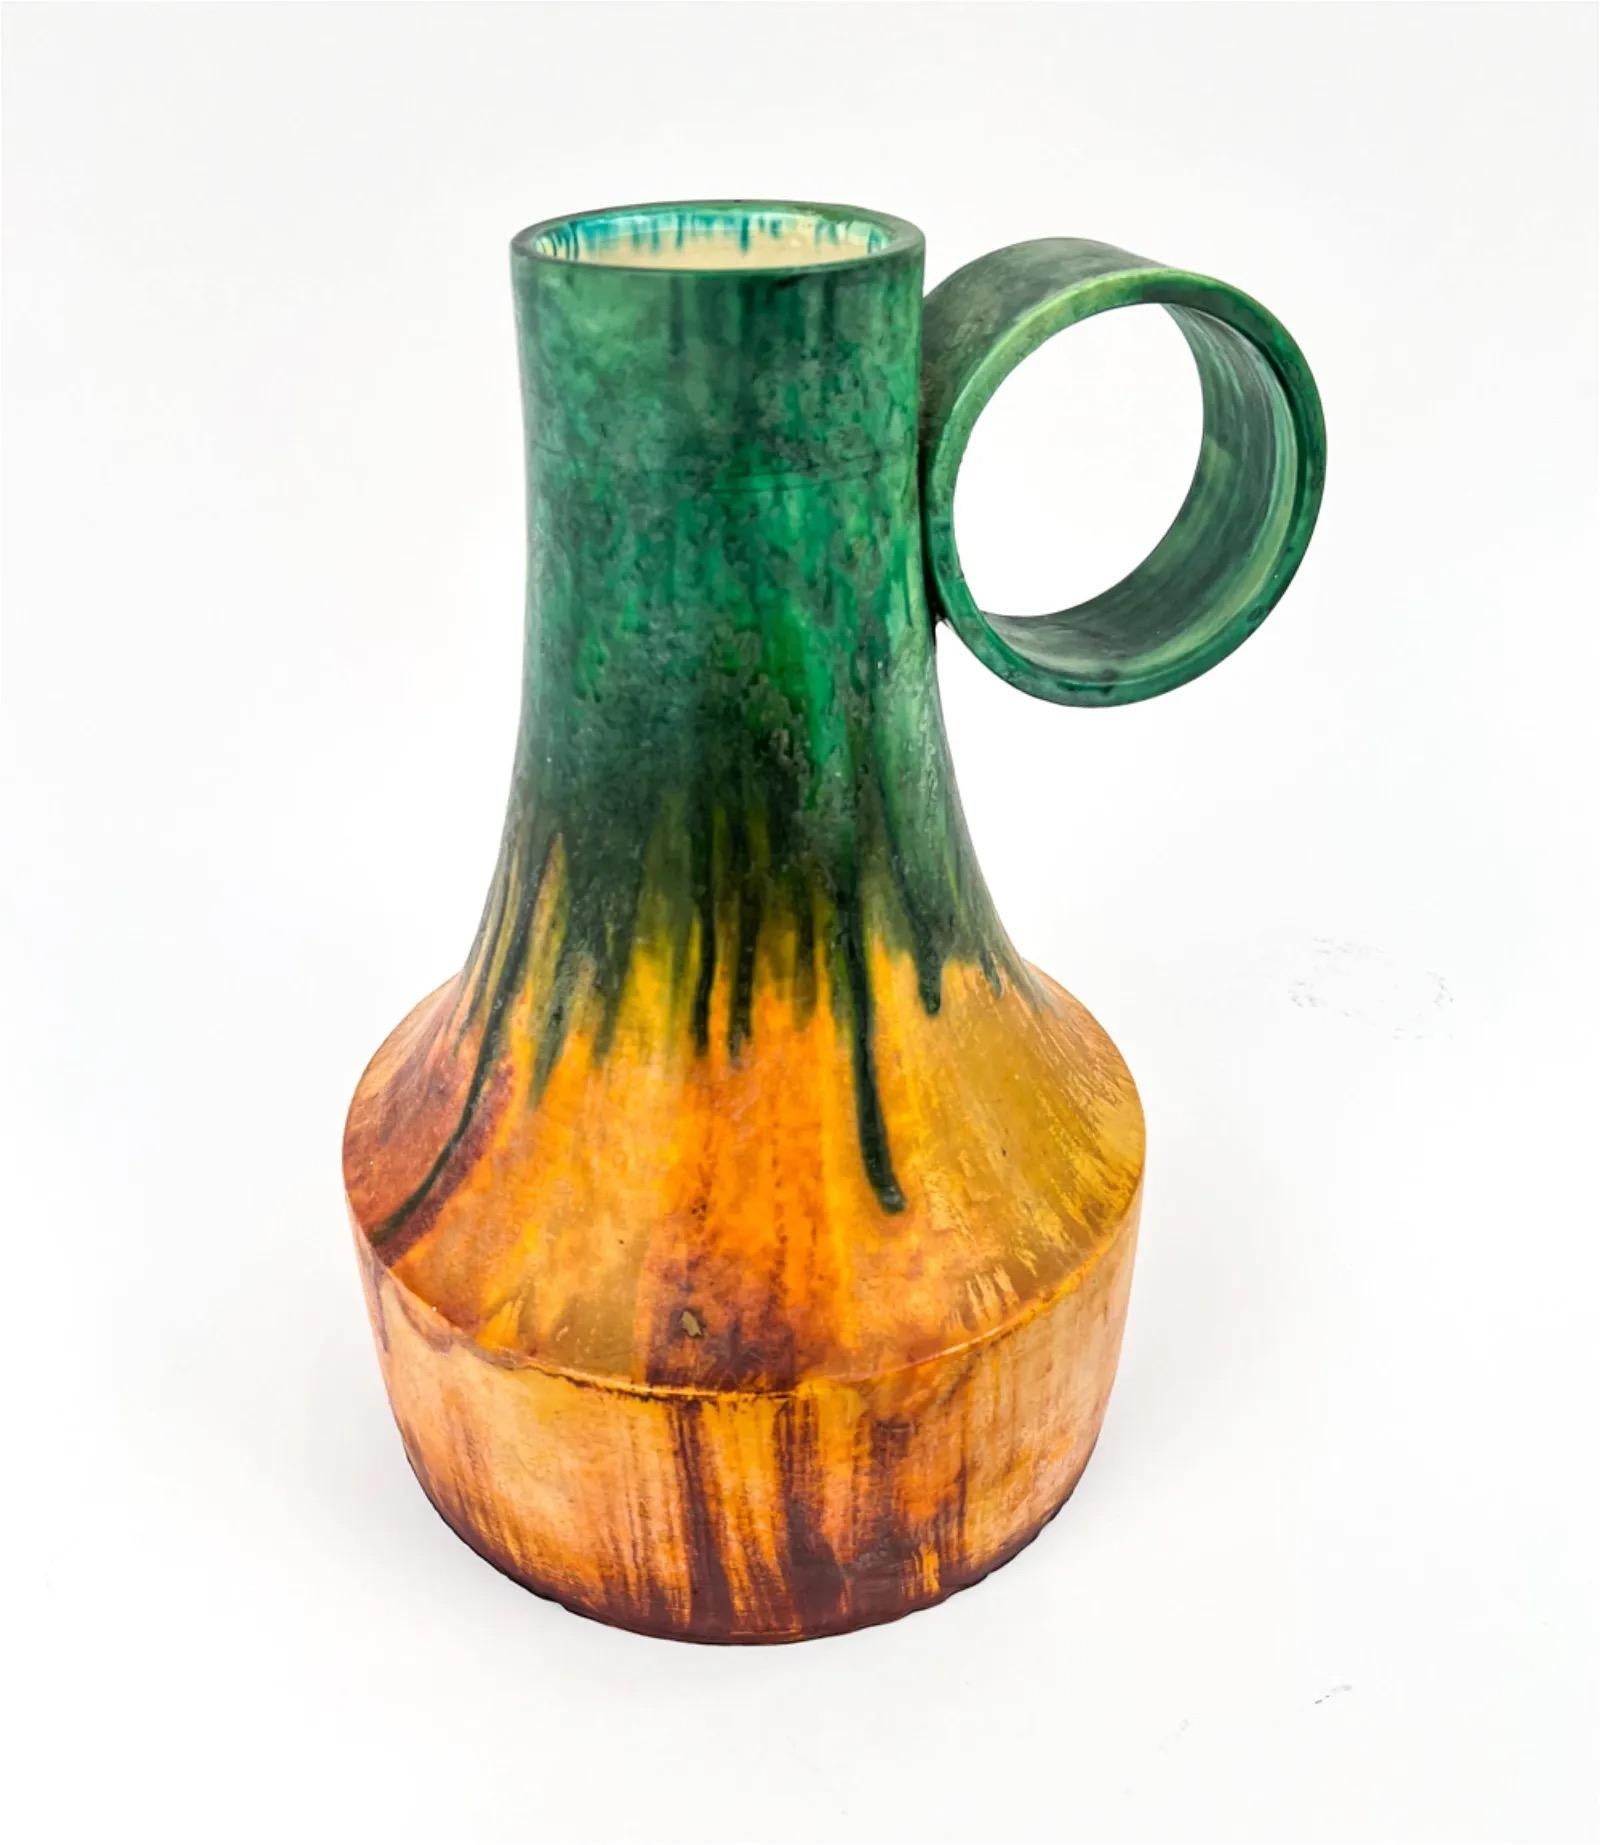 Marcello Fantoni Monumental Tuscan Ewer, Ceramic Vase or Pitcher, Italy In orange, green flambé glaze.  Extremely rare form and scale with stunning large-scale handle. Signed underneath: Fantoni, Italy. Numbered 03005 underneath. Dimensions: H